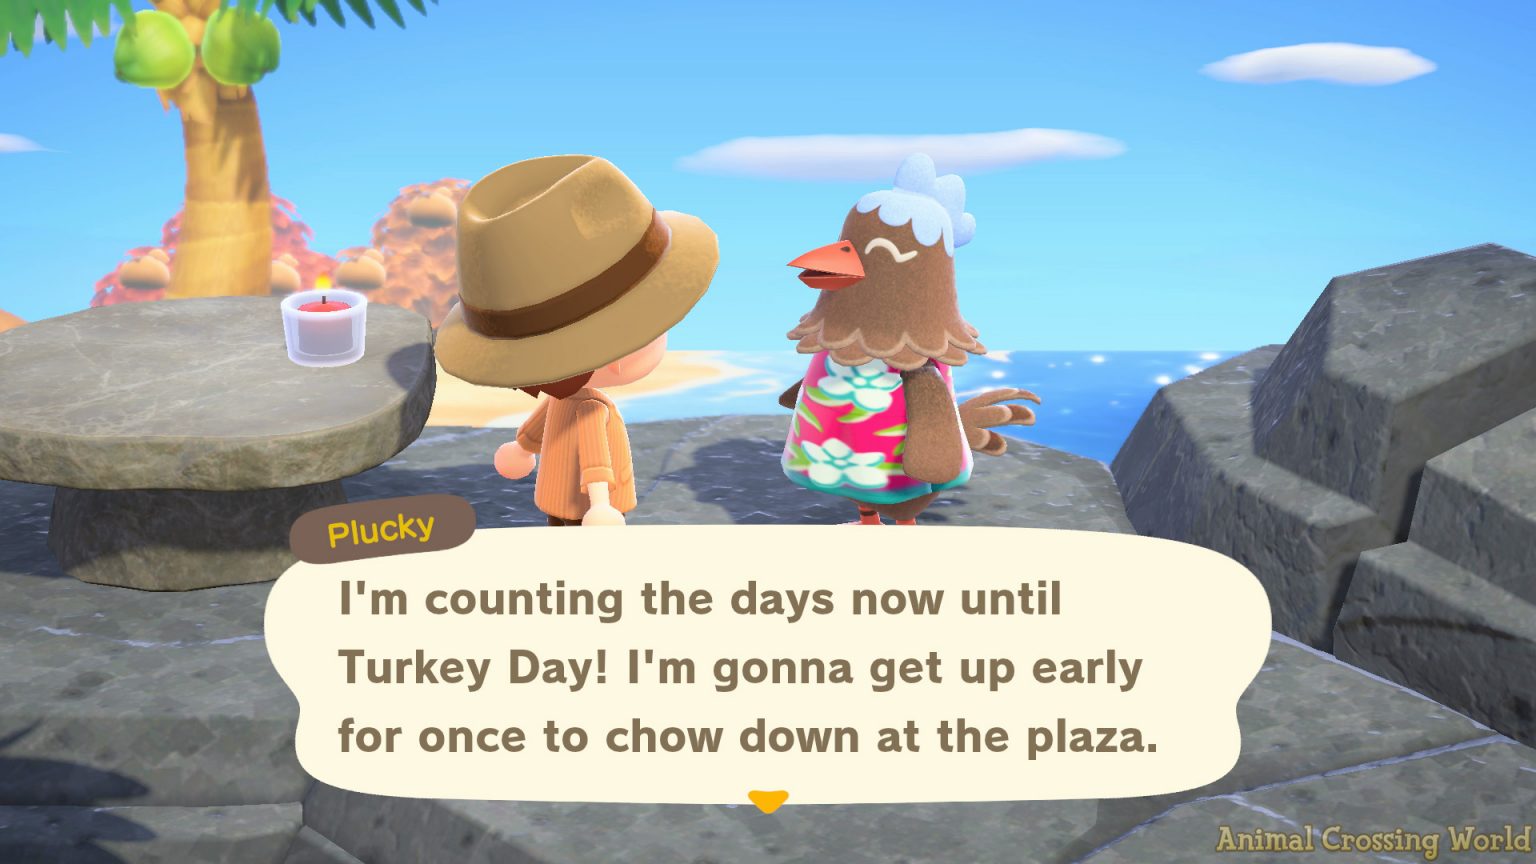 Turkey Day Event Preparations Begin Today In Animal Crossing New